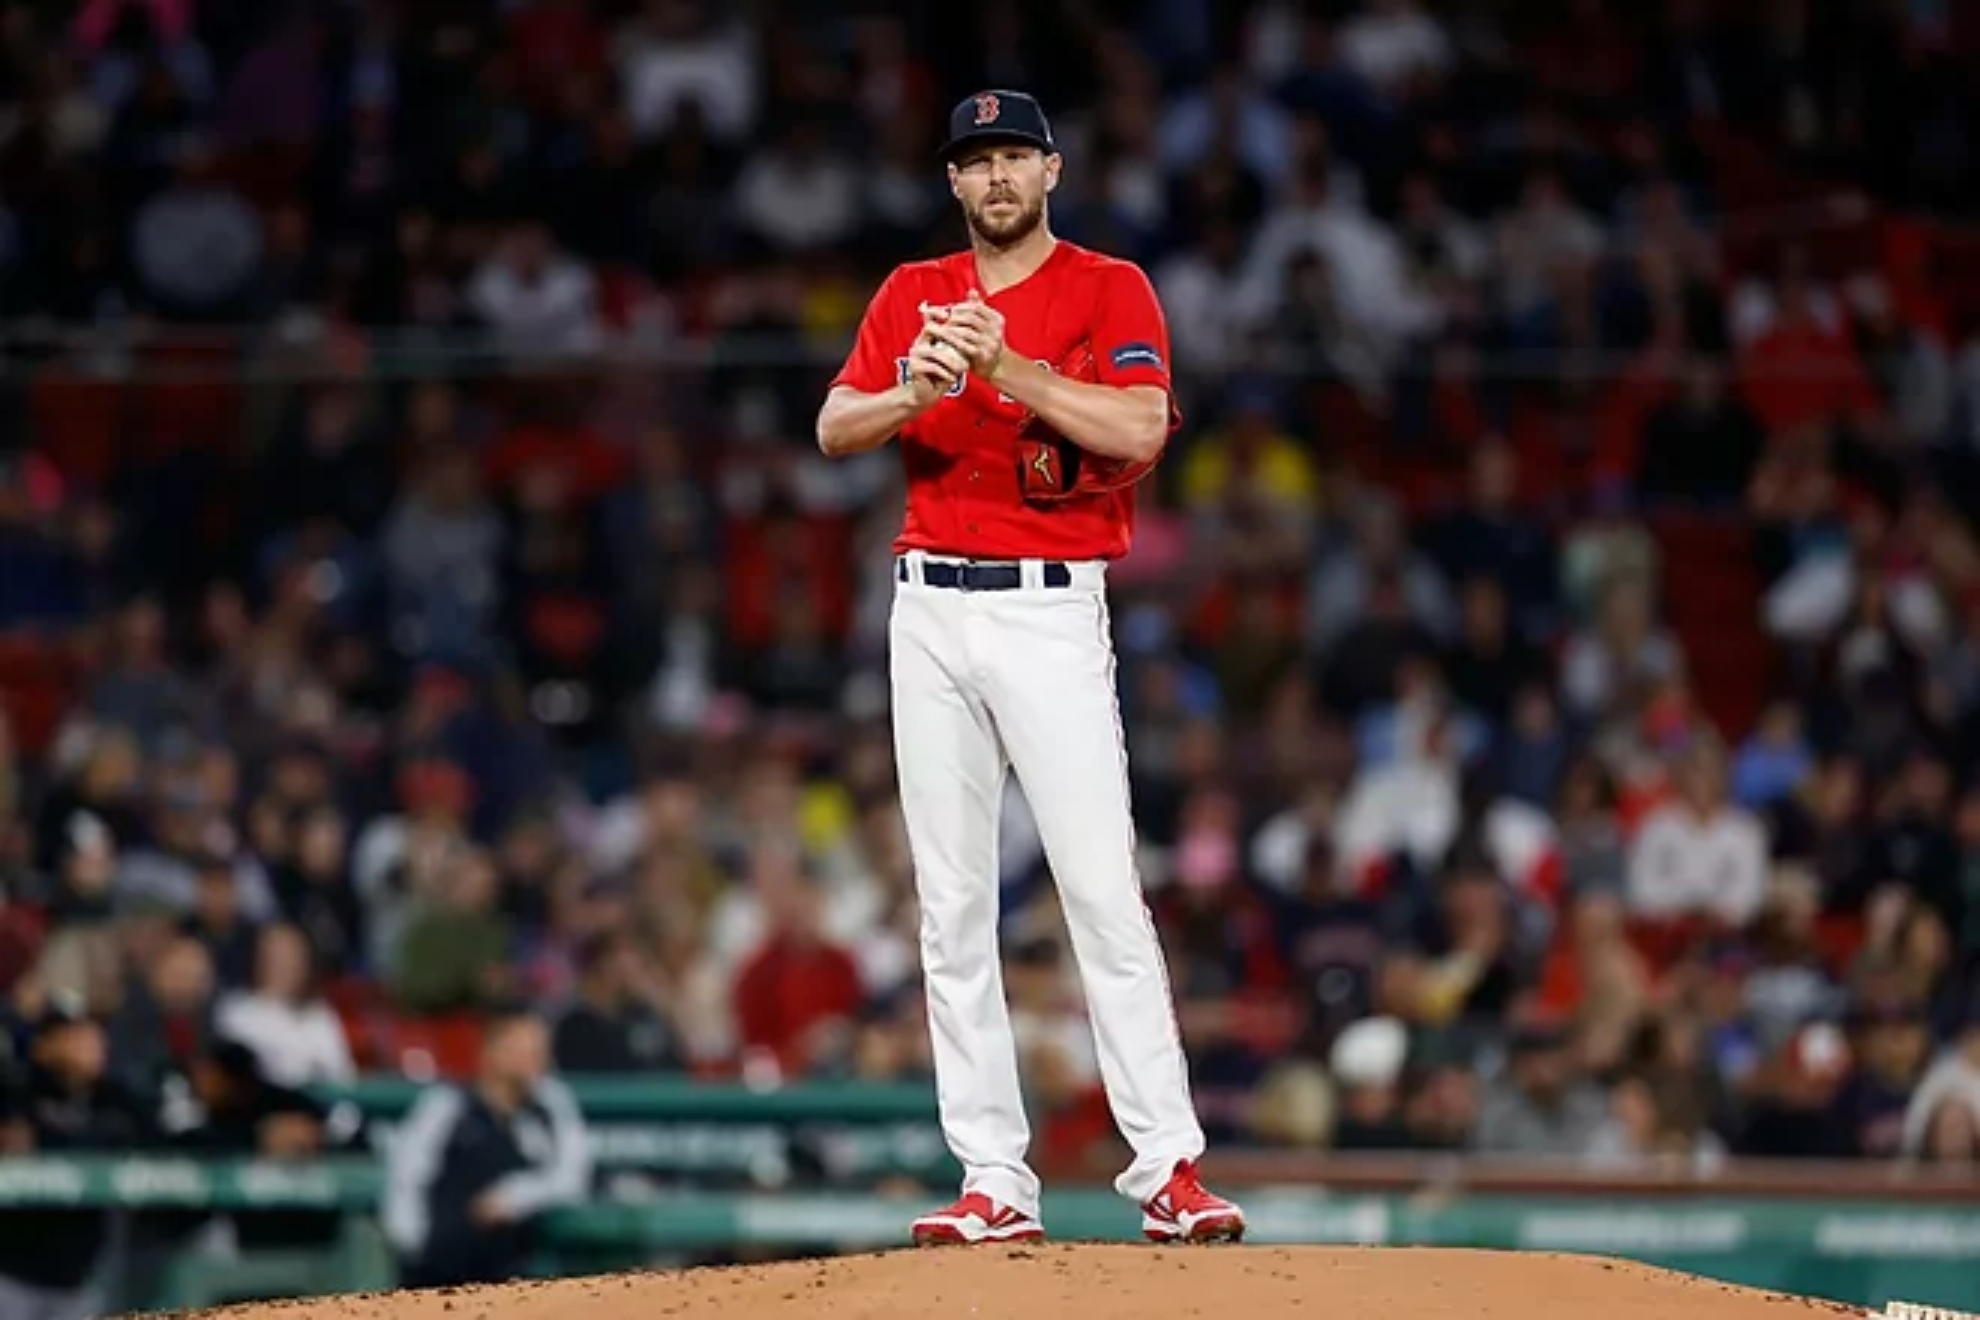 Atlanta Braves unexpectedly acquire All-Star pitcher Chris Sale in trade with Red Sox